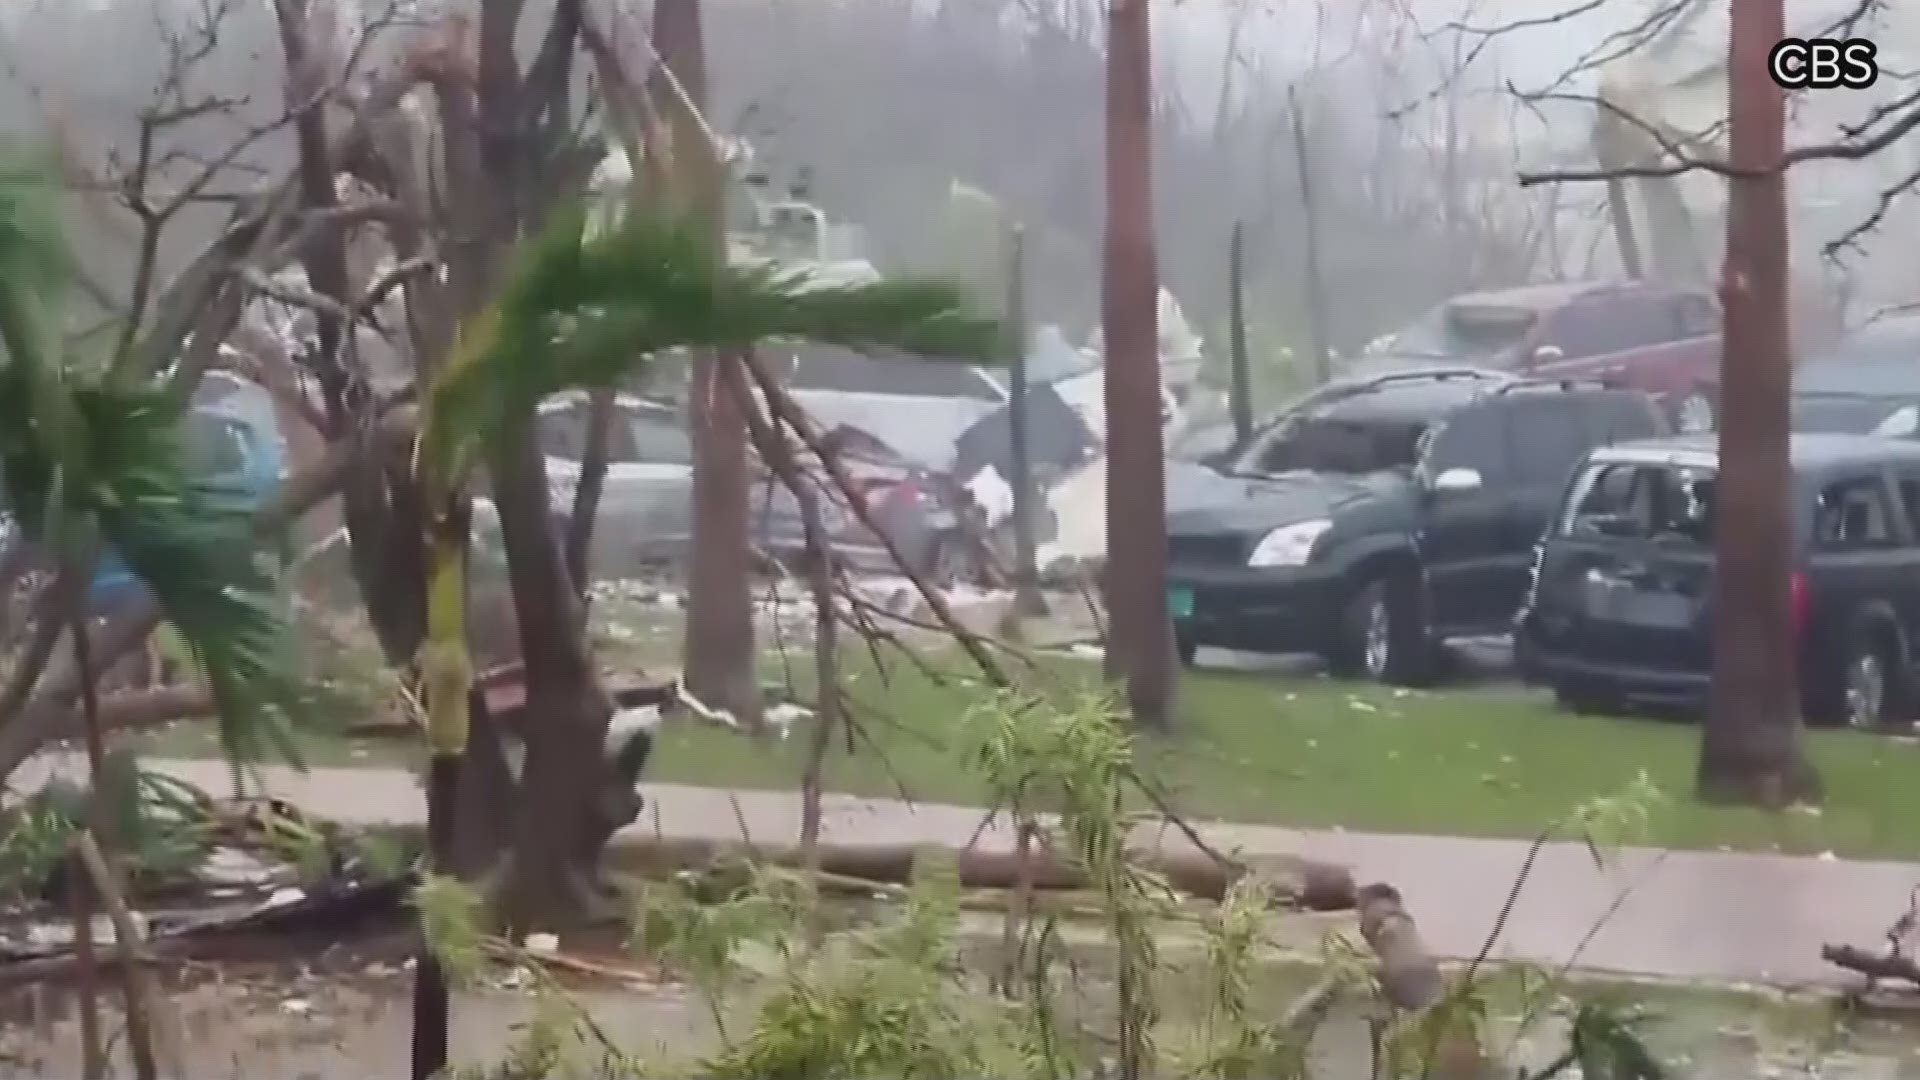 Catastrophic Hurricane Dorian keeps pounding the Bahamas early Labor Day as a Category 5 storm. It's one of the strongest Atlantic storms ever recorded in the Bahamas, leaving wrecked homes, shredded roofs, tumbled cars and toppled cars in its wake. This video shared with The Associated Press shows trees being rocked and strong winds spreading debris near a parking lot of damaged cars outside the Abaco Beach Resort.